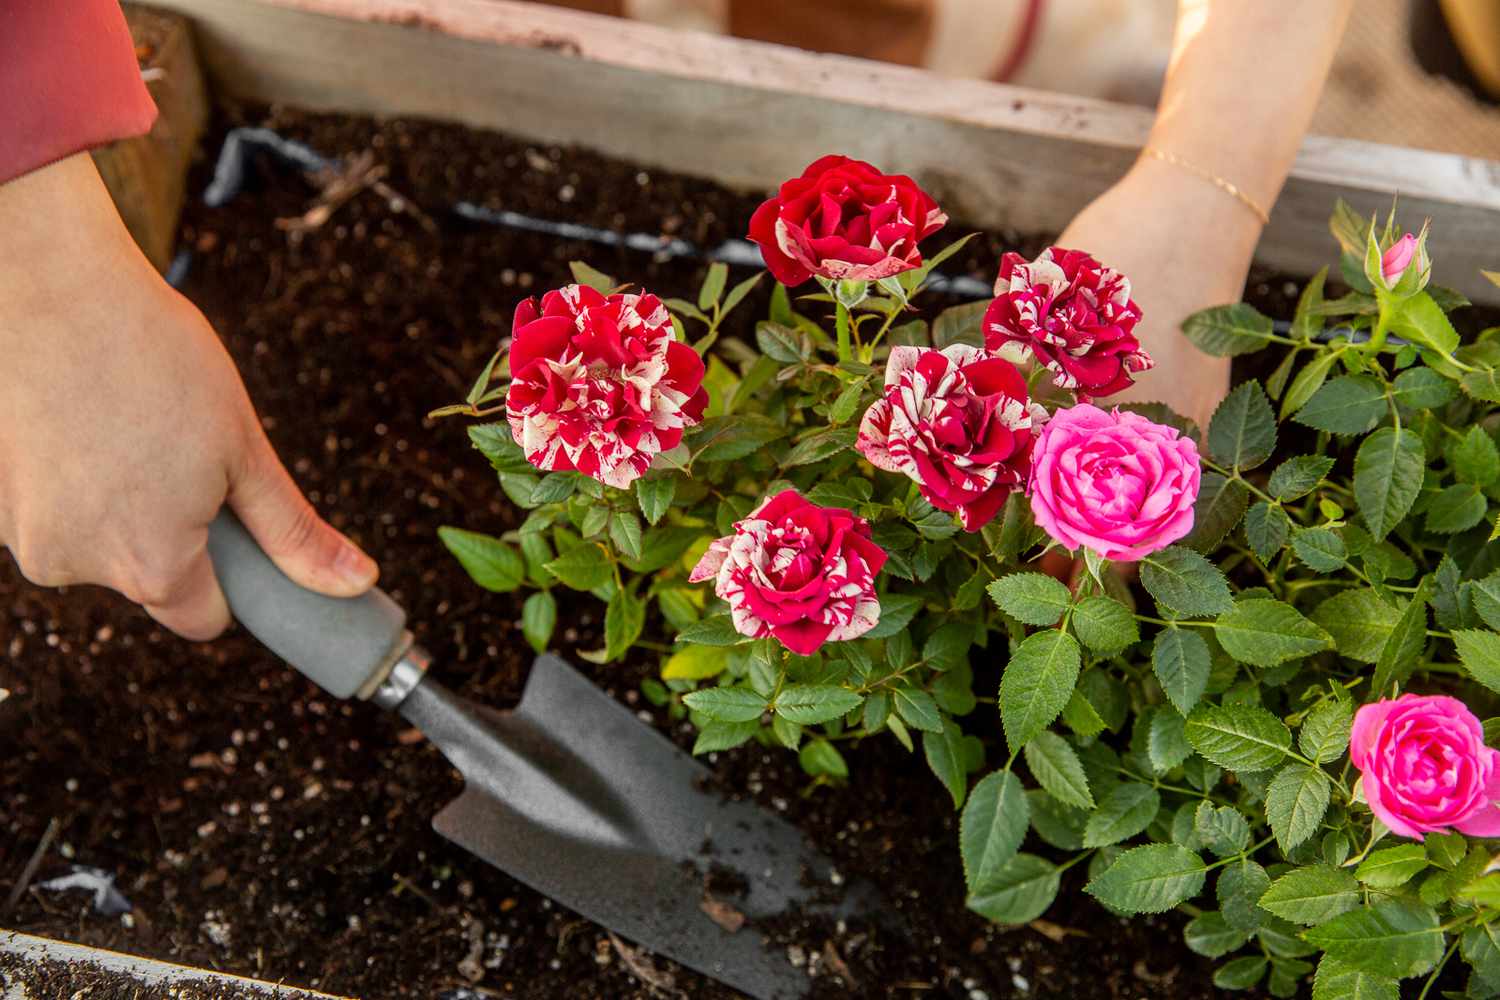 Red and white splattered and pink roses being prepared in garden with hand-held shovel